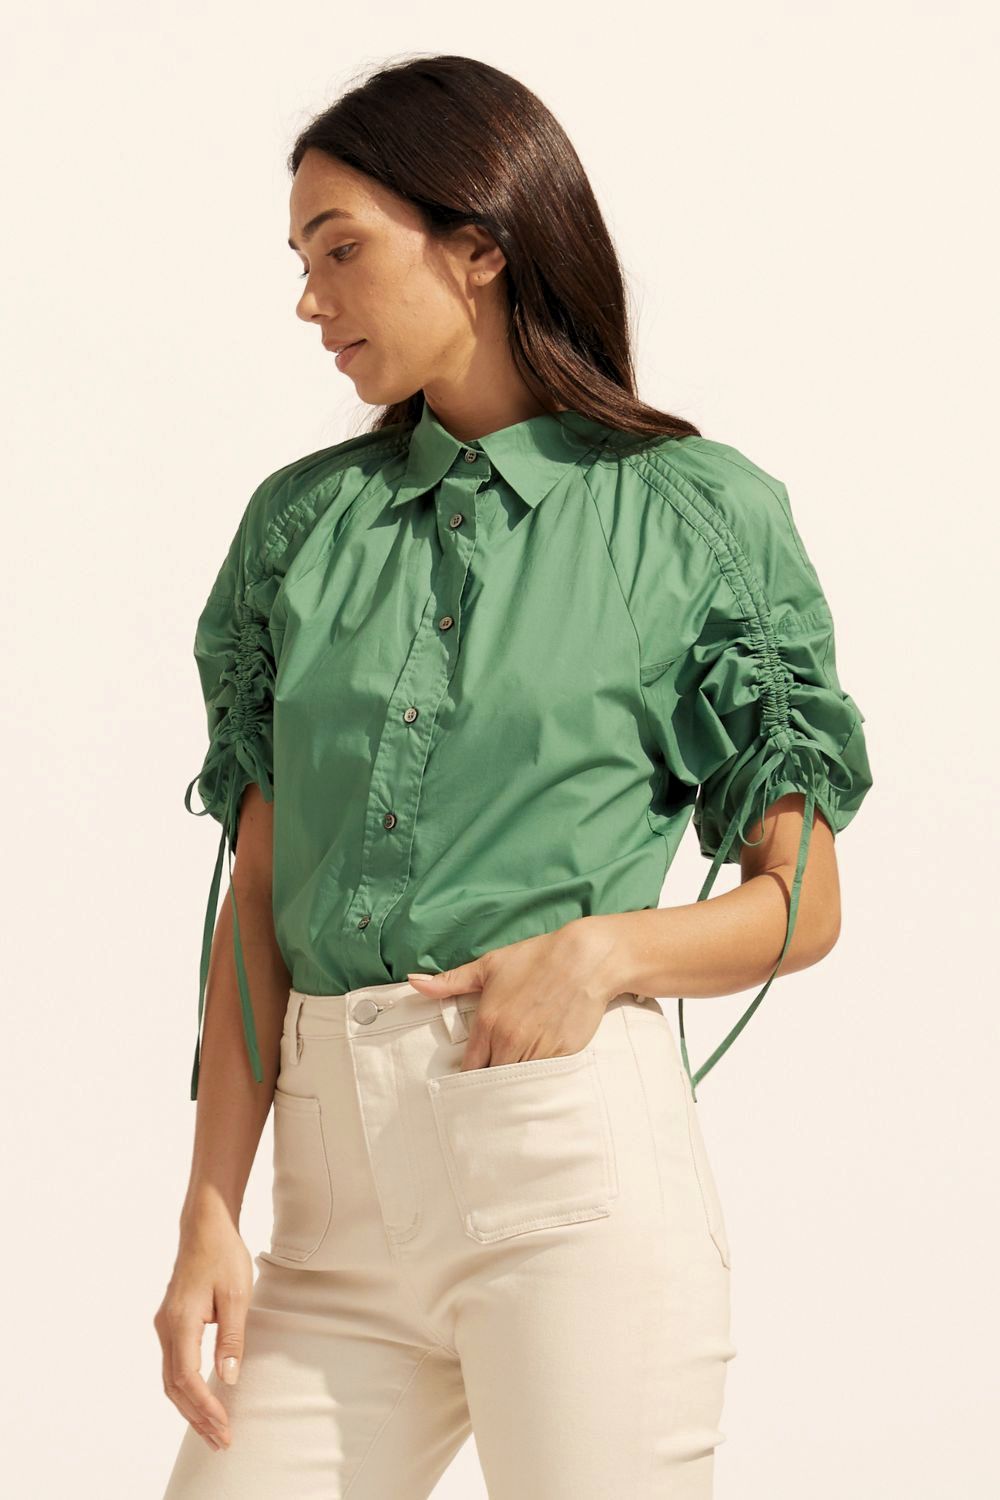 shirt, green, button up, rouched sleeves, adjustable ties on sleeves, side image